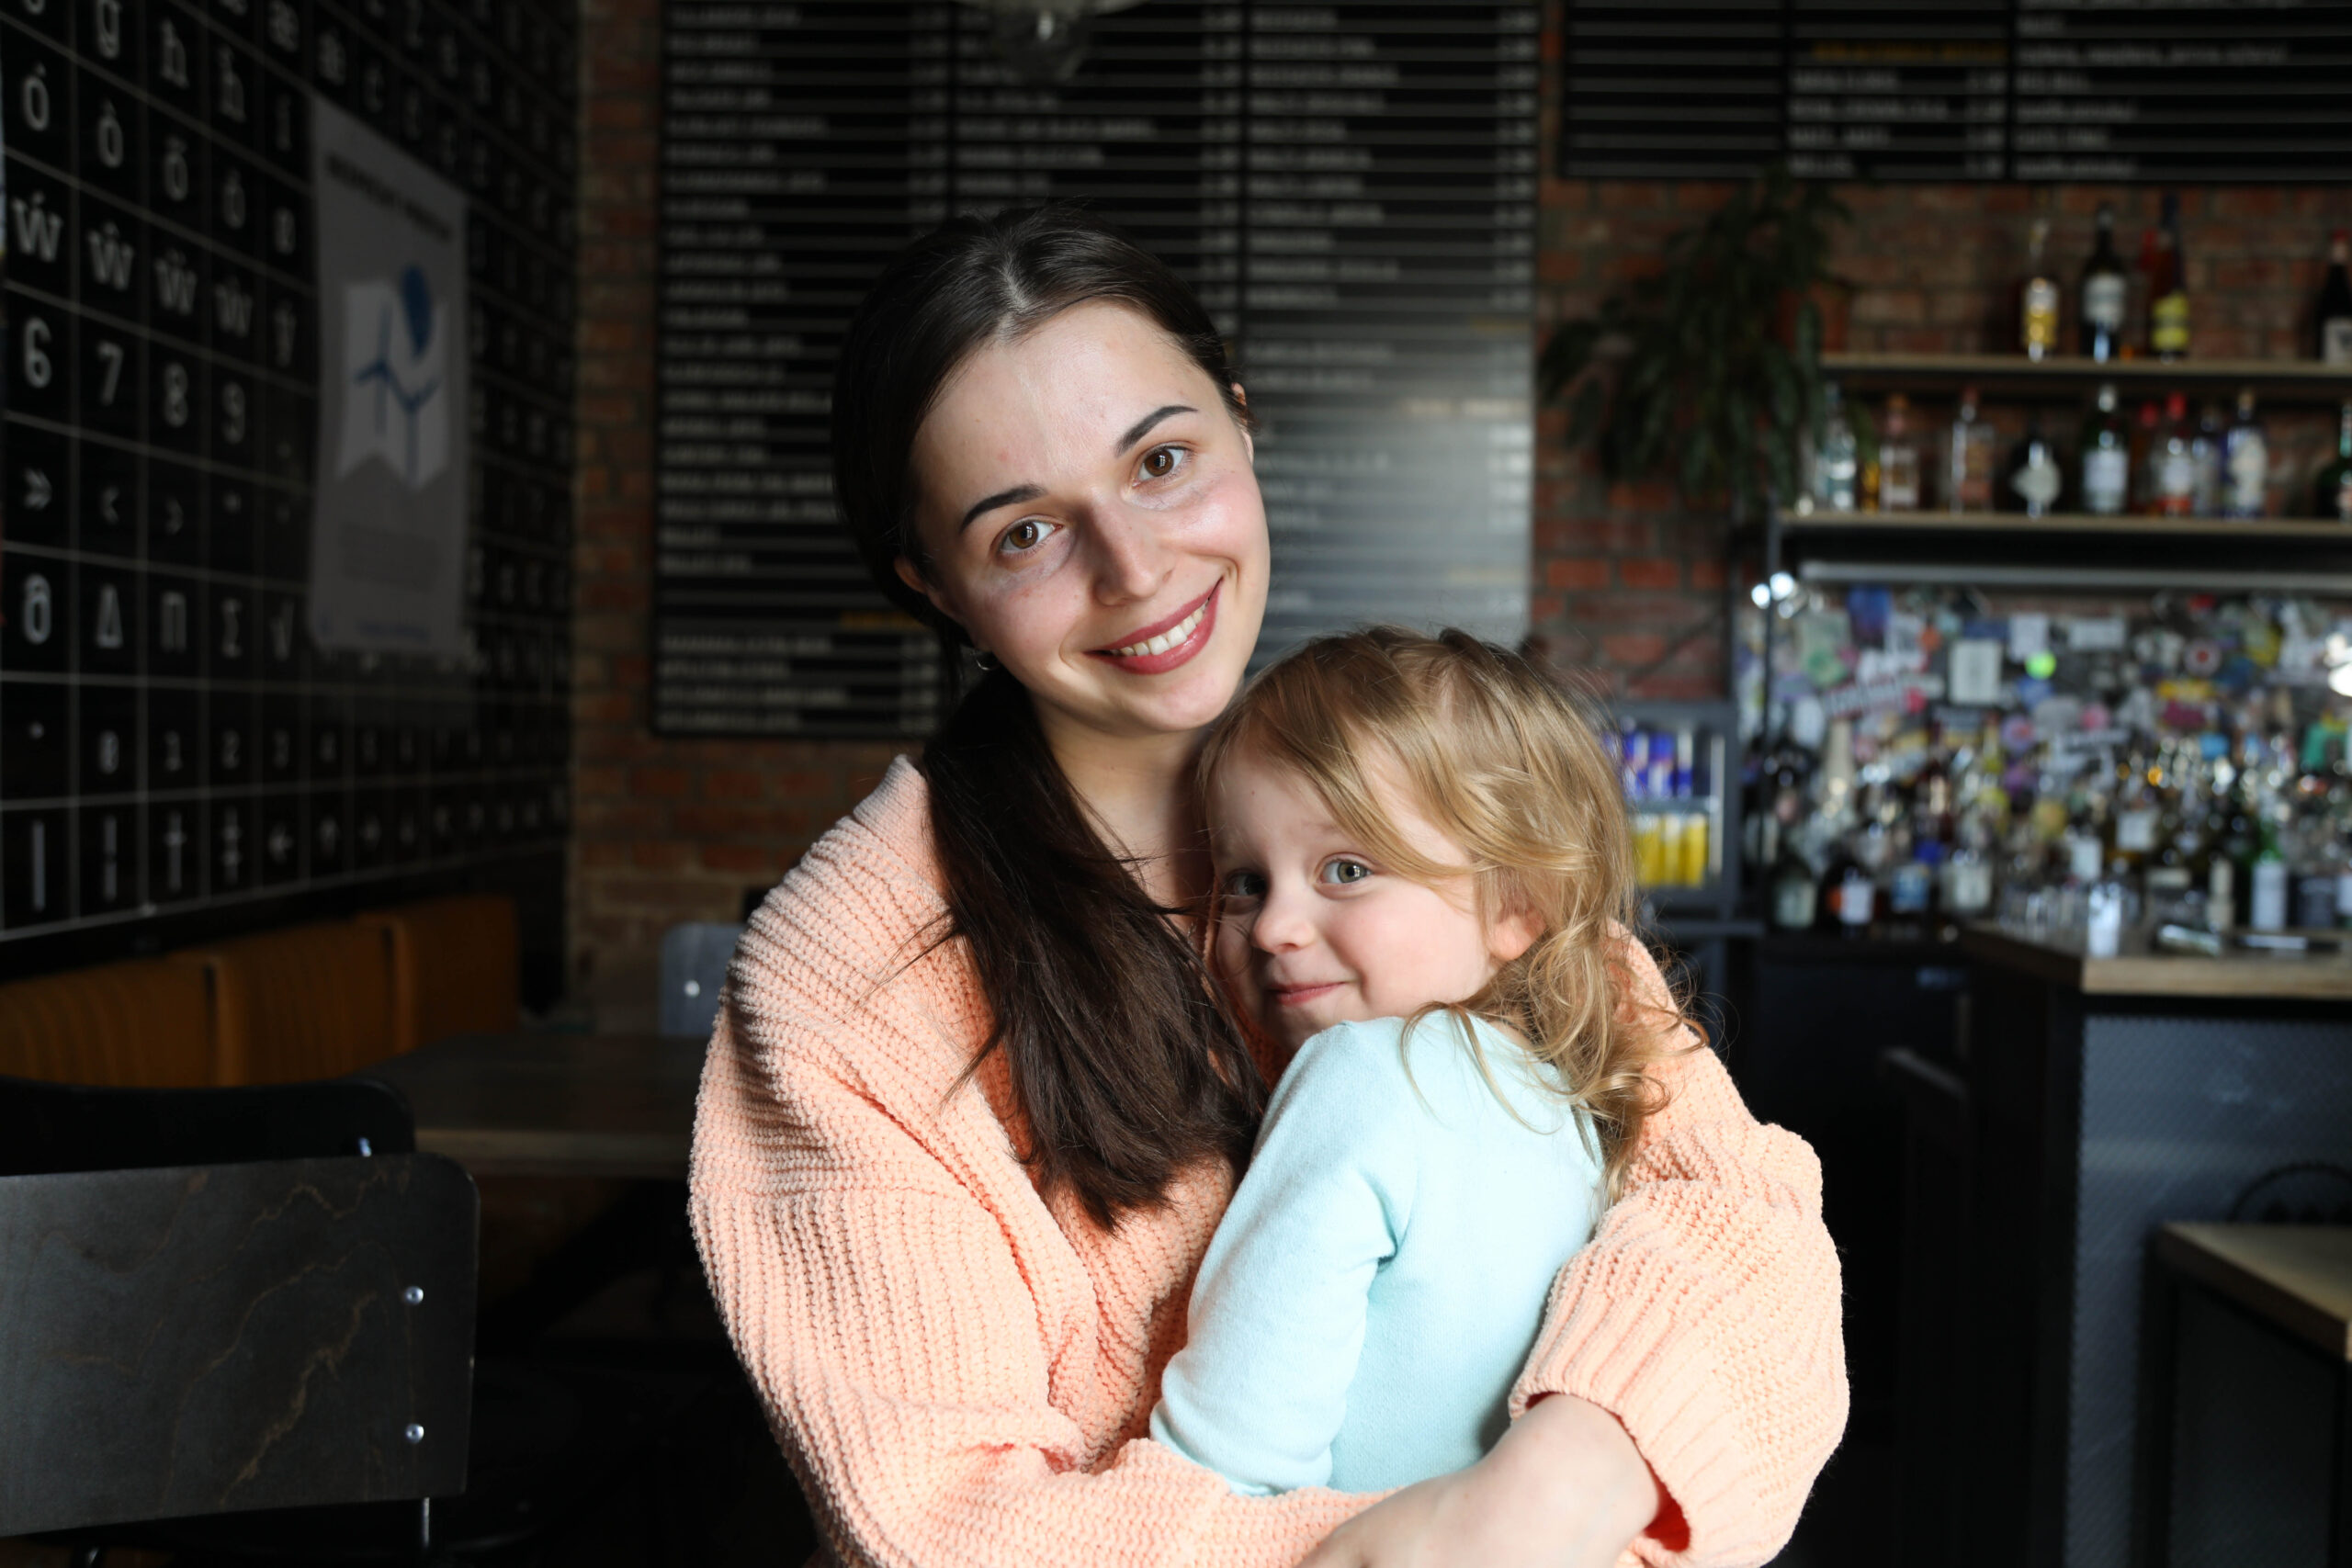 Victoria, 31, together with her daughter Olivia, 3,5. Victoria is from Kharkiv Ukraine. She arrived to Slovakia in 2018 and is a psychologist working on child-inclusion. When Russia's full-scale invasion of Ukraine broke out in February 2022, and refugees started arriving to Slovakia, Victoria saw the need for a safe space for mothers and children. In April 2022, she opened up her centre 